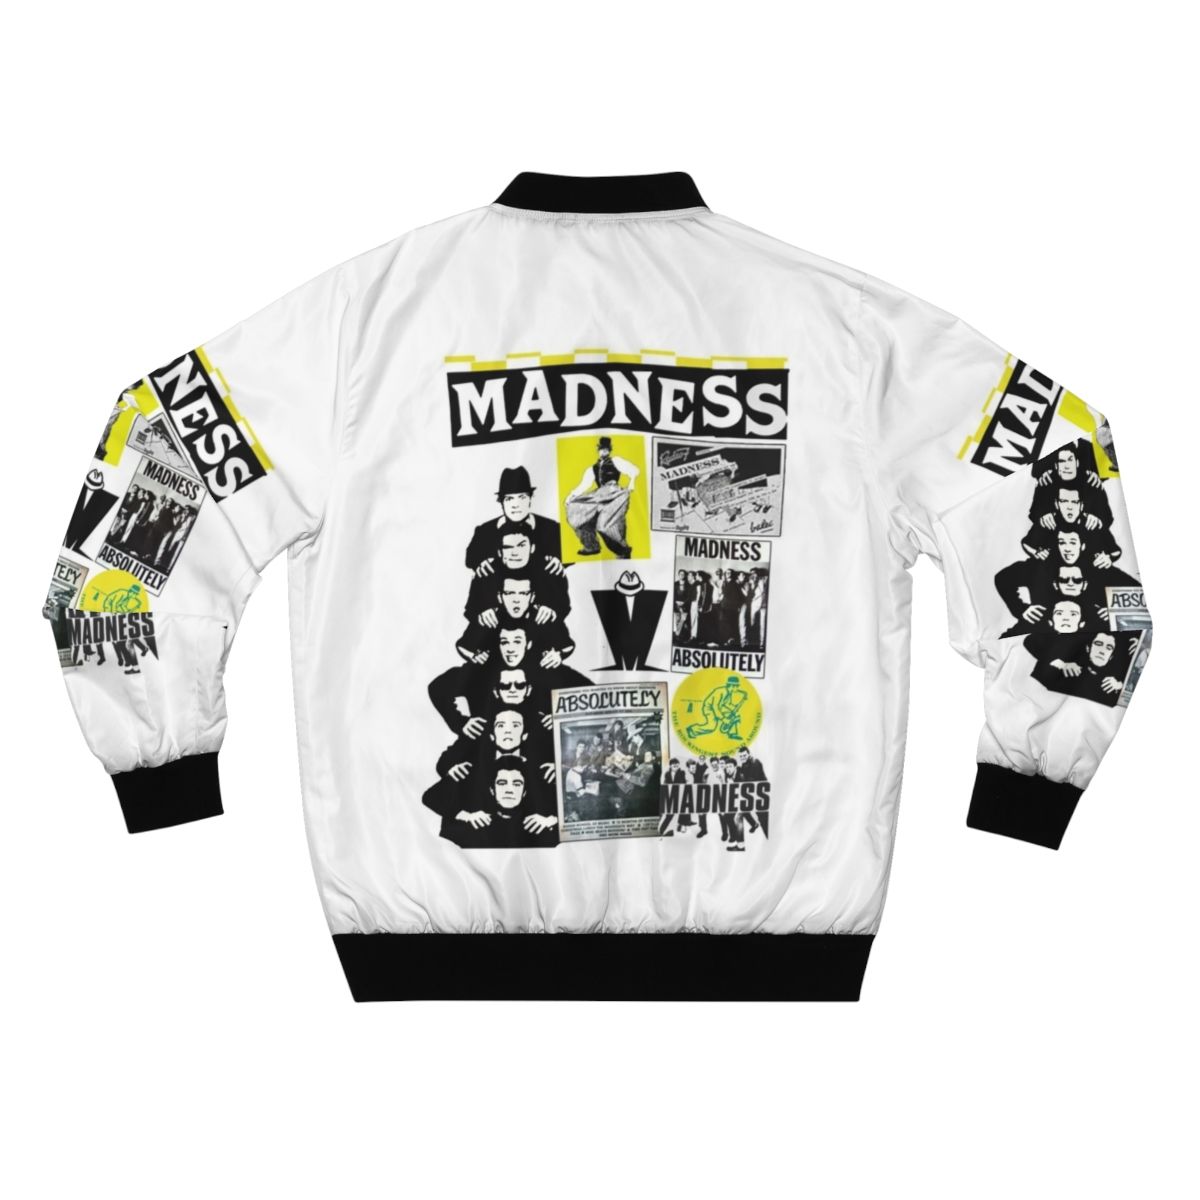 Madness band retro bomber jacket with vintage logo and graphics - Back